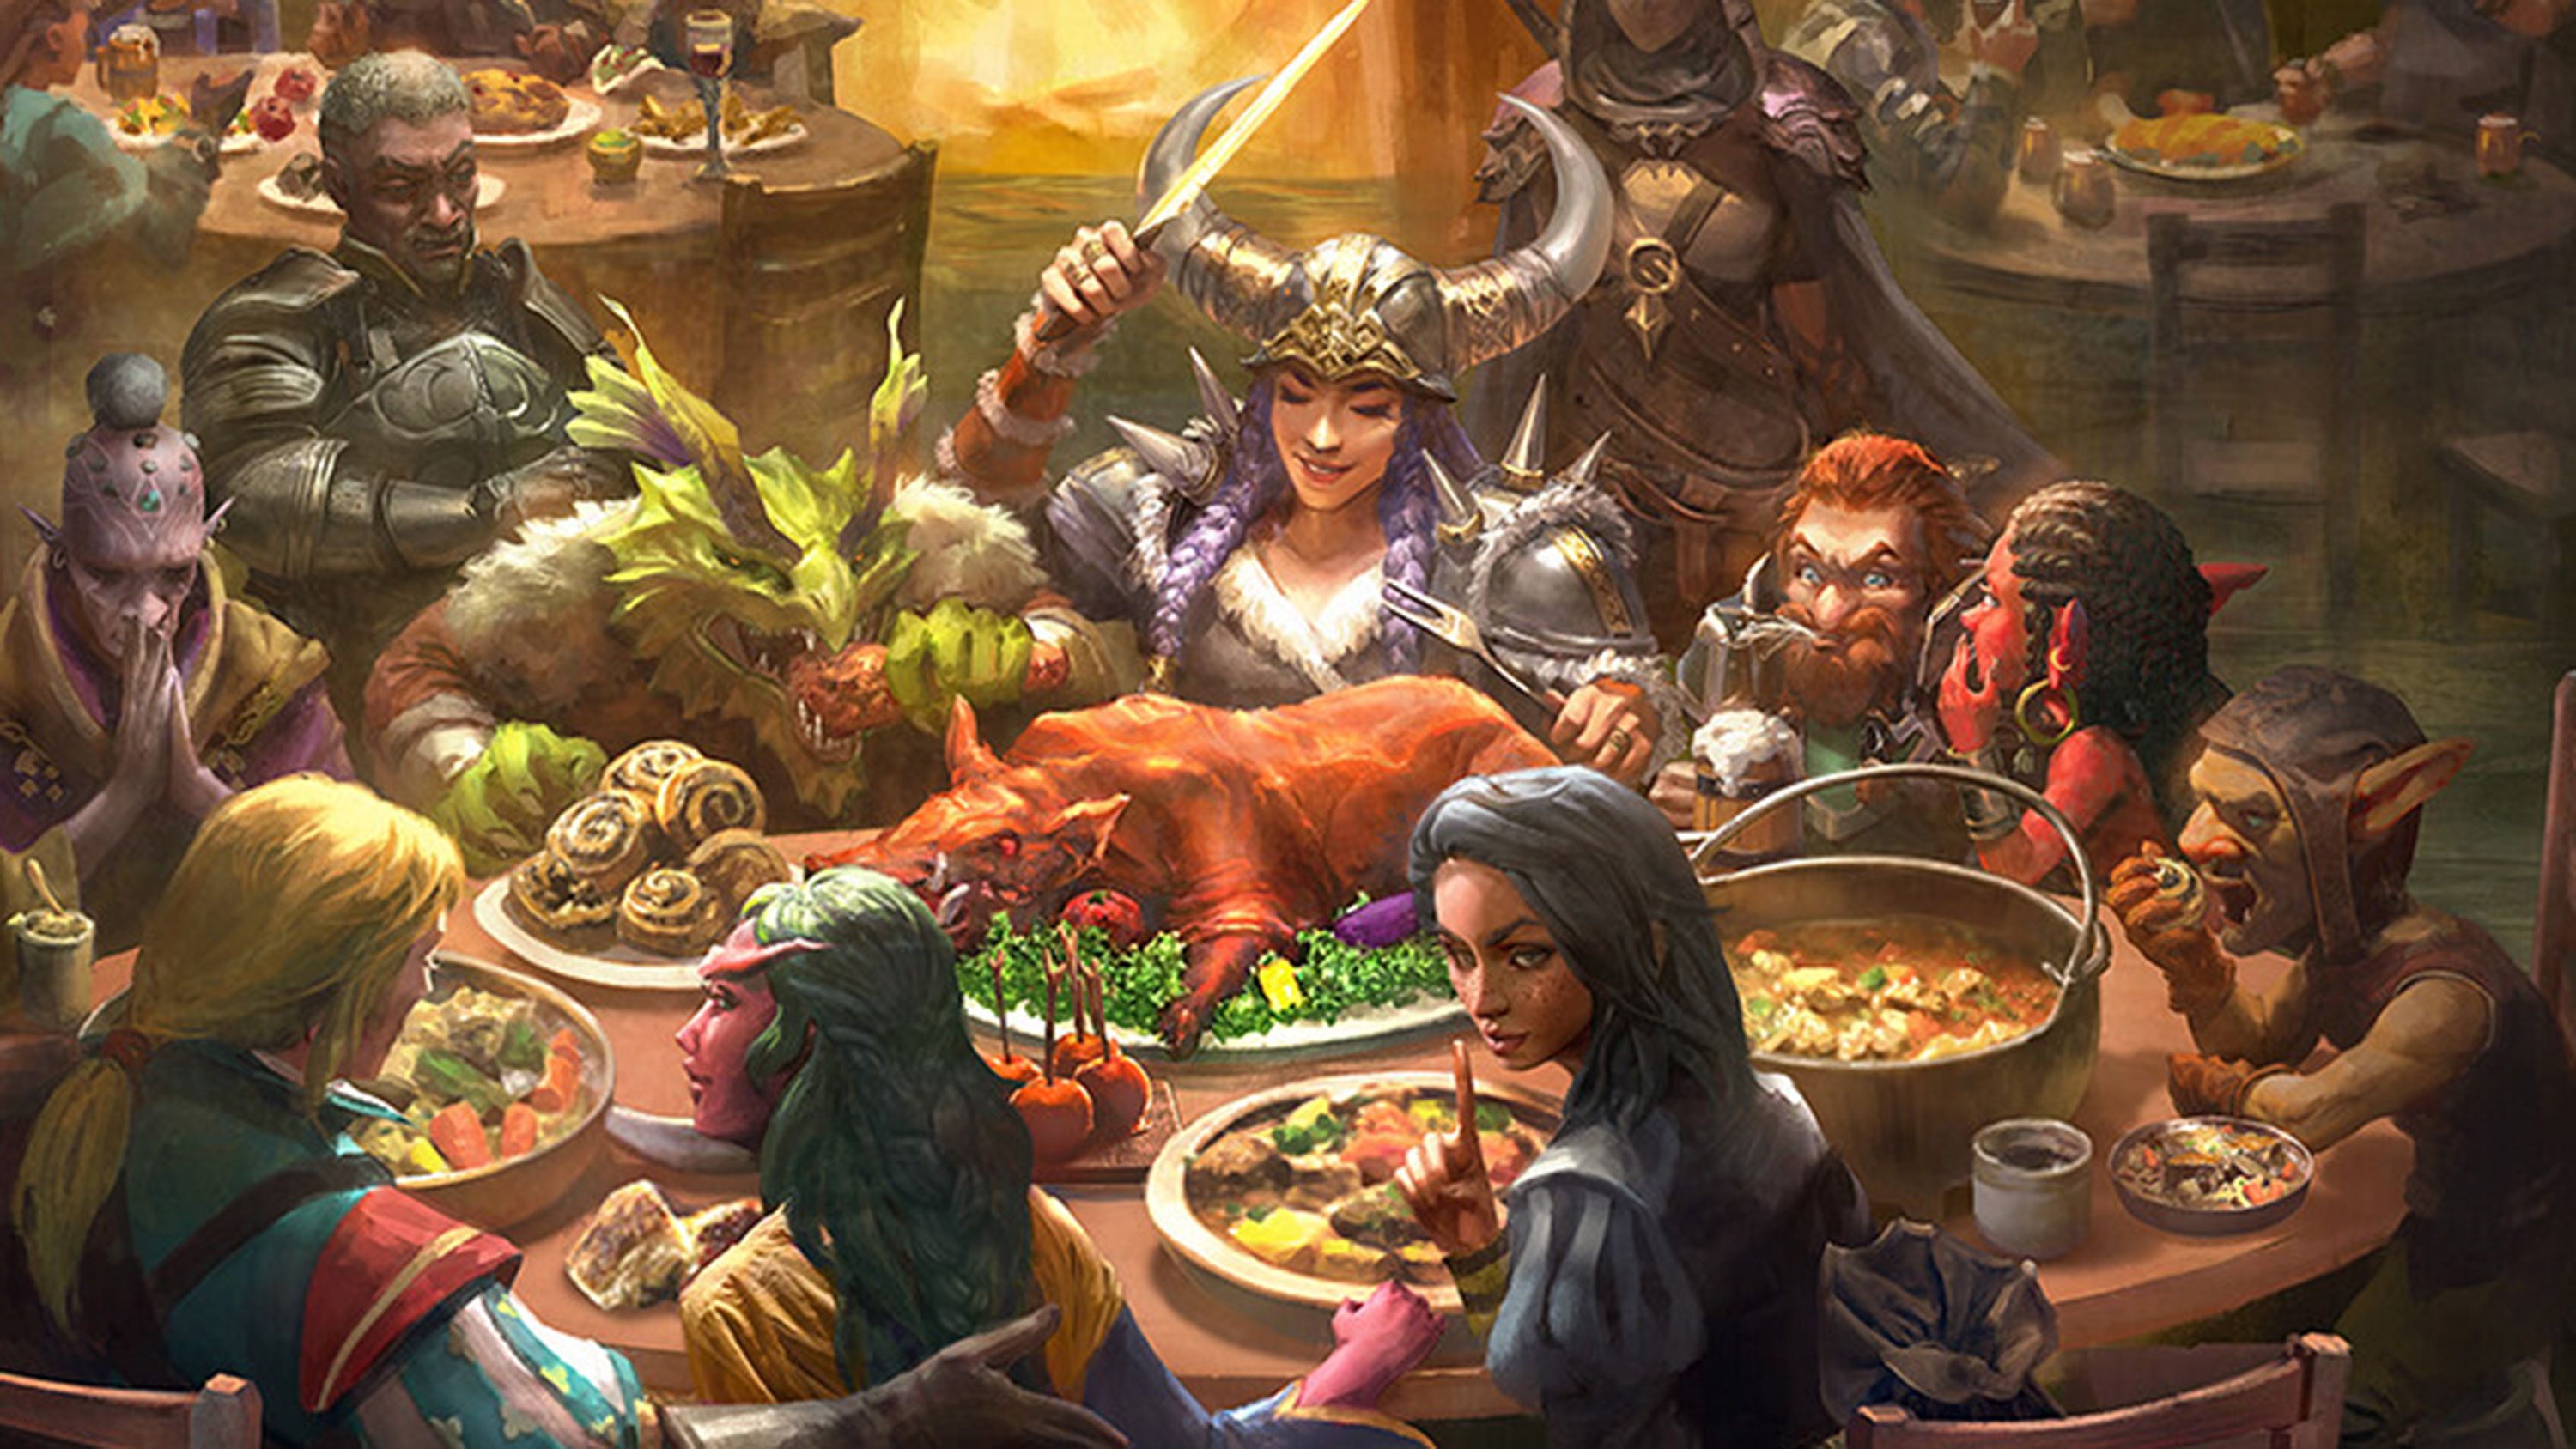 A group of addventurers sitting around the Yawning Portal enjoying a sumptuous feast. Dishes include a whole pig, sweet rolls, and what looks like candied apples alongside a rich stew. A dwarf, hearing something from a neighboring tiefling, spits out his beer. Cover art for Heroes’ Feast, a D&amp;D-themed cookbook.